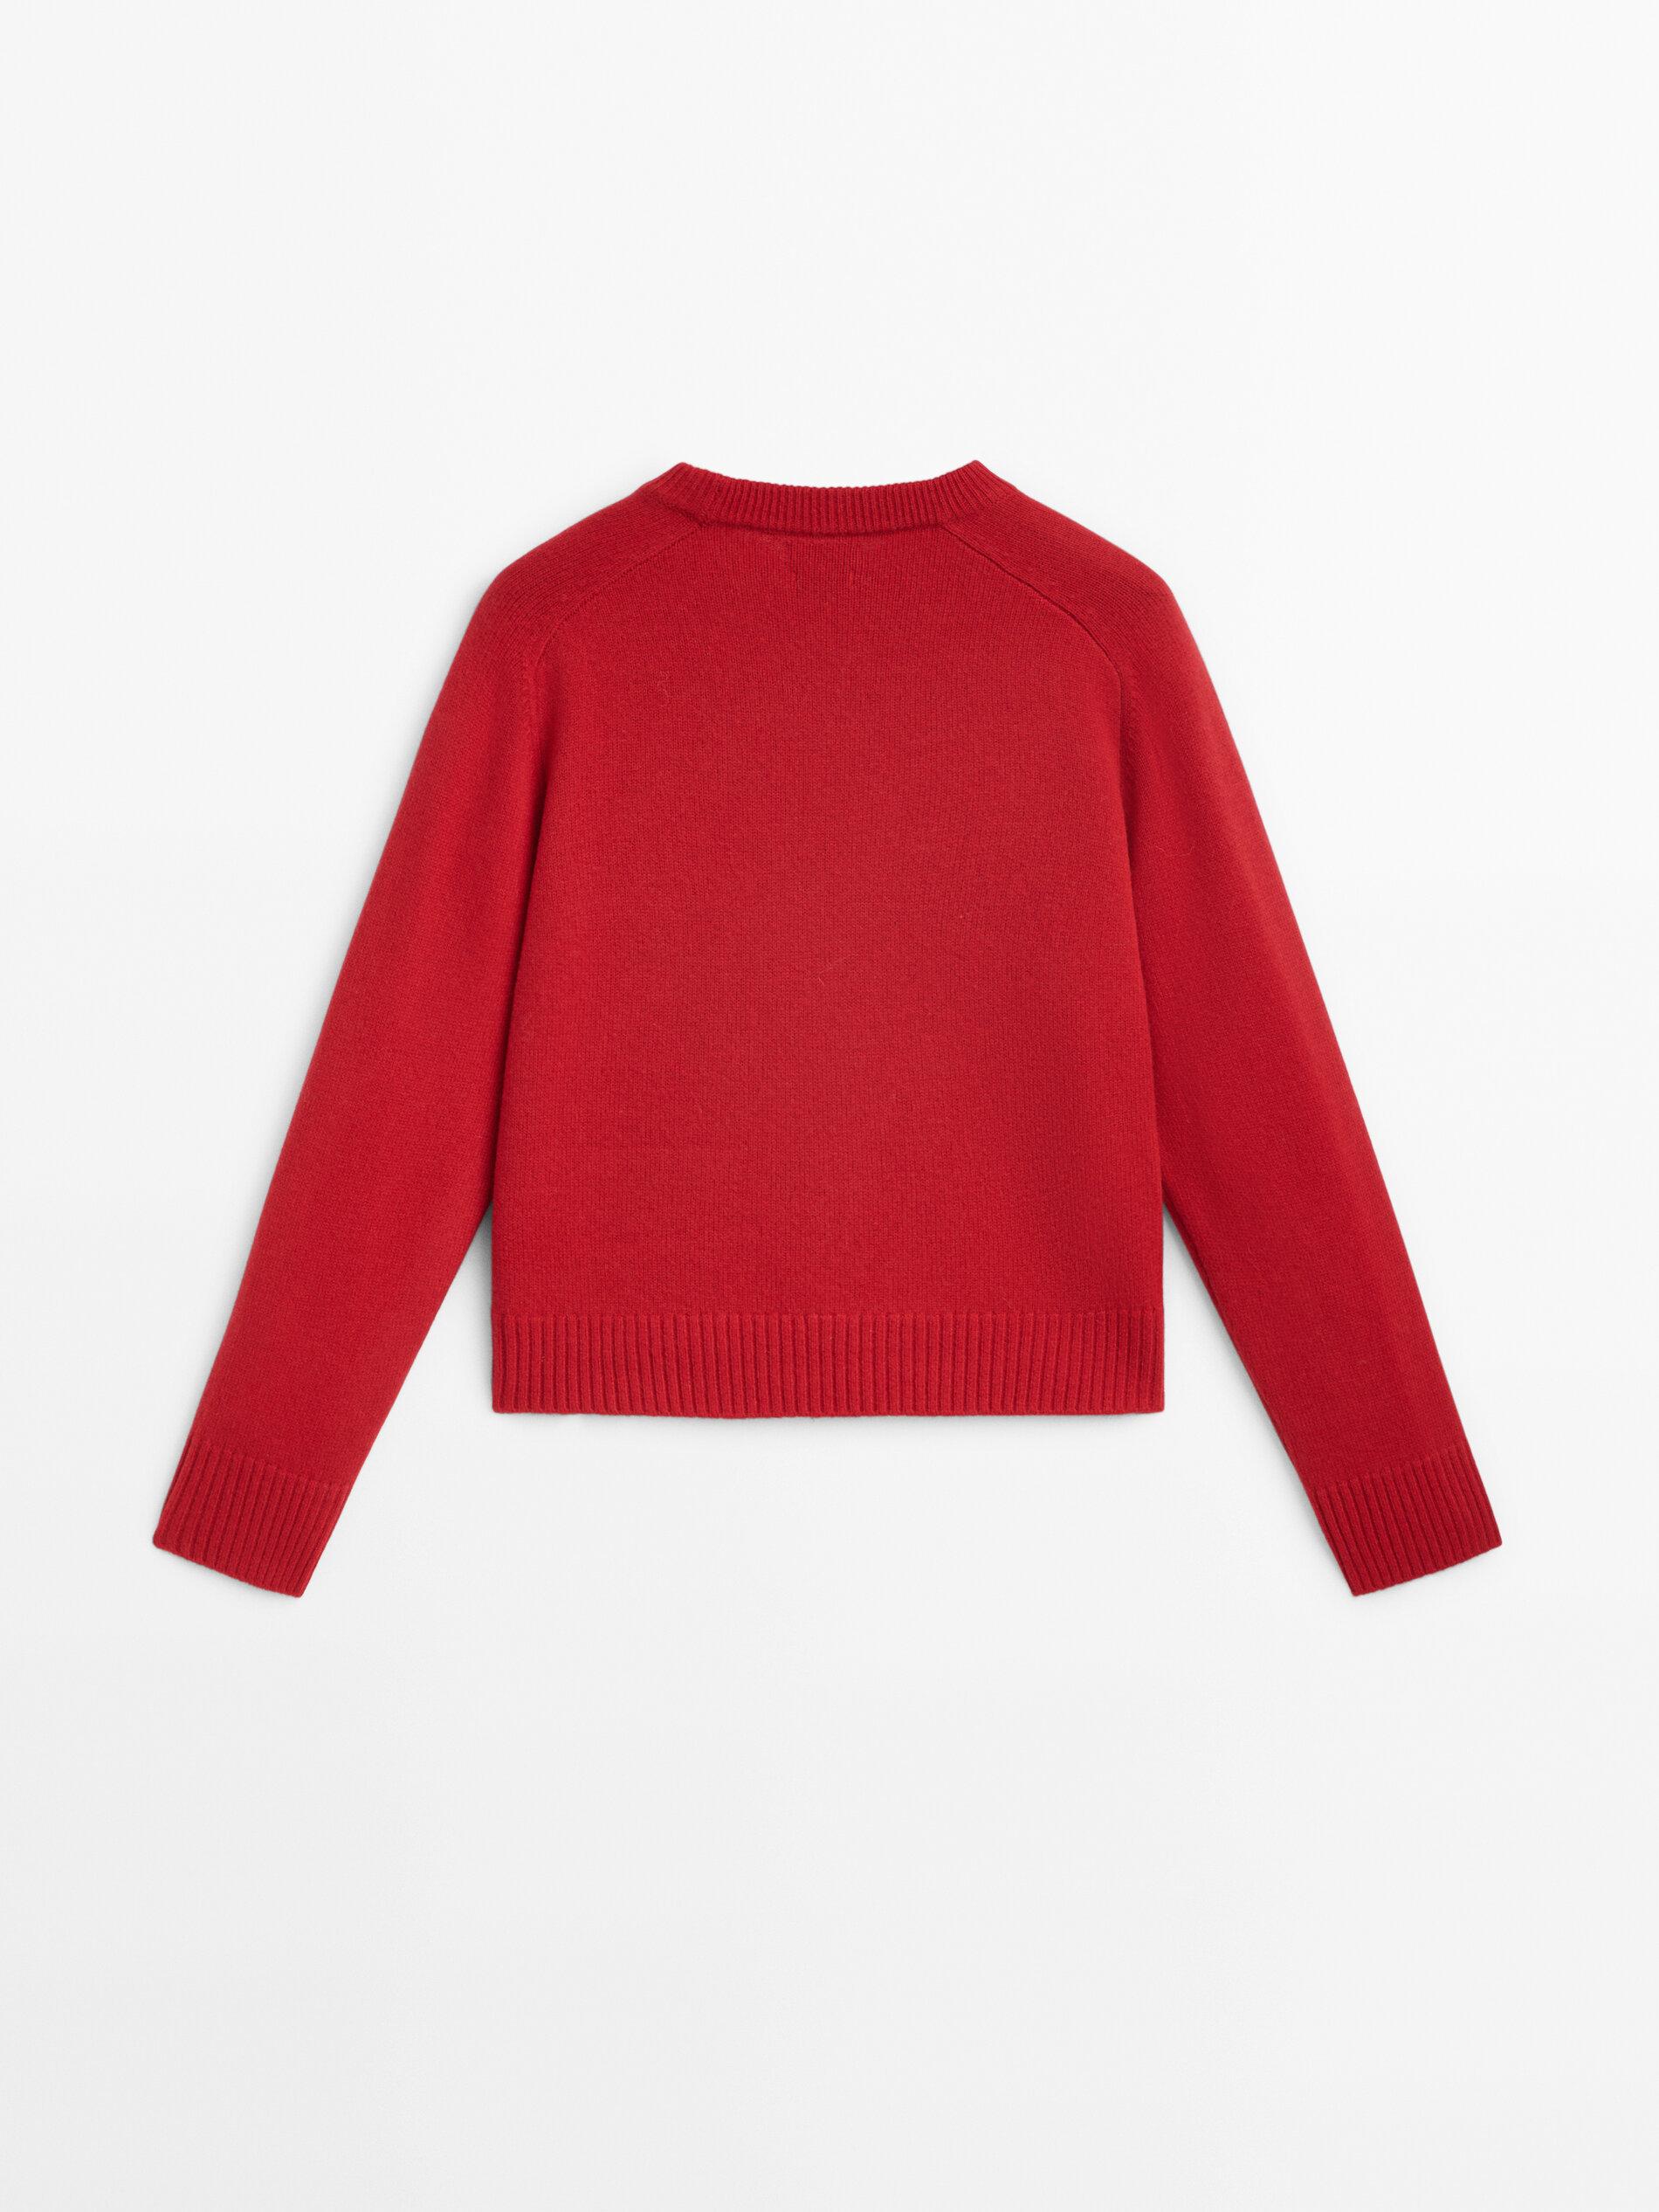 MASSIMO DUTTI Wool Blend Knit Sweater in Red | Lyst